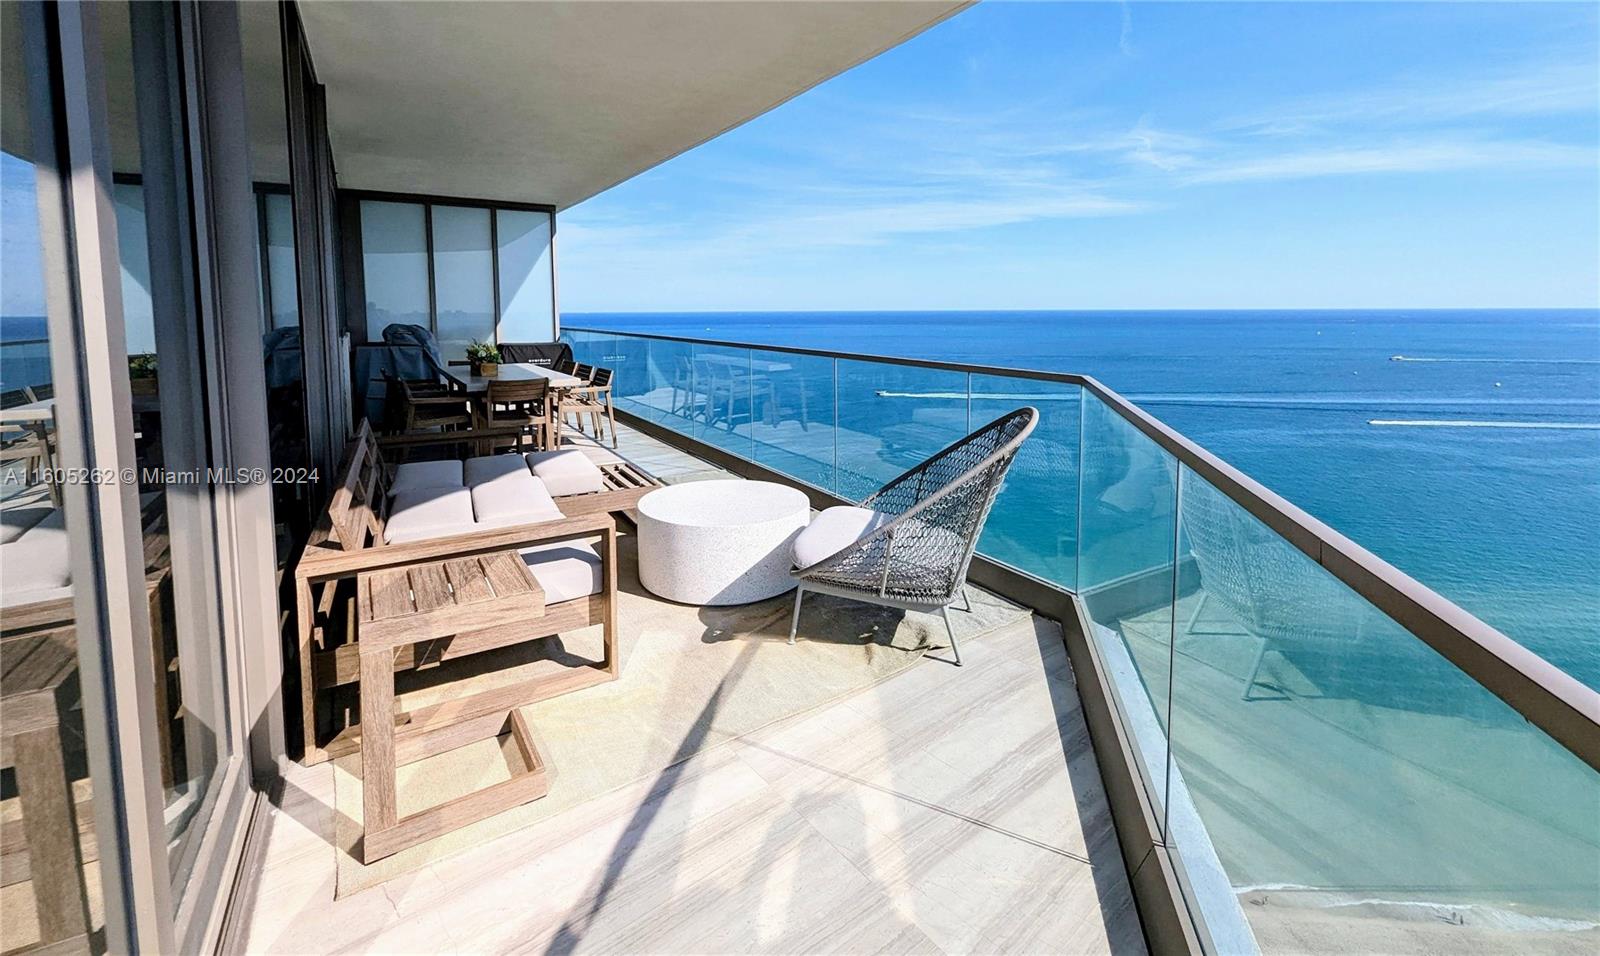 Live the Armani dream at this oceanfront masterpiece in Sunny Isles Beach. Exquisite 2-bed+den apartment stuns with panoramic ocean & city views through 10-foot ceilings & expansive windows. Step into a haven of exquisitely-designed elegance, featuring top-of-the-line appliances & gleaming stone countertops. Dive into endless world-class amenities: private oceanfront dining, serene Armani Spa, movie theater and more. This prime unit comes with a tenant already in place for the next 6 months, providing immediate income potential after closing. Fully furnished and impeccably decorated, it's move-in ready for you or your future tenant. Don't miss out on this opportunity to own a piece of the Armani legacy and experience luxury reimagined. Act fast.